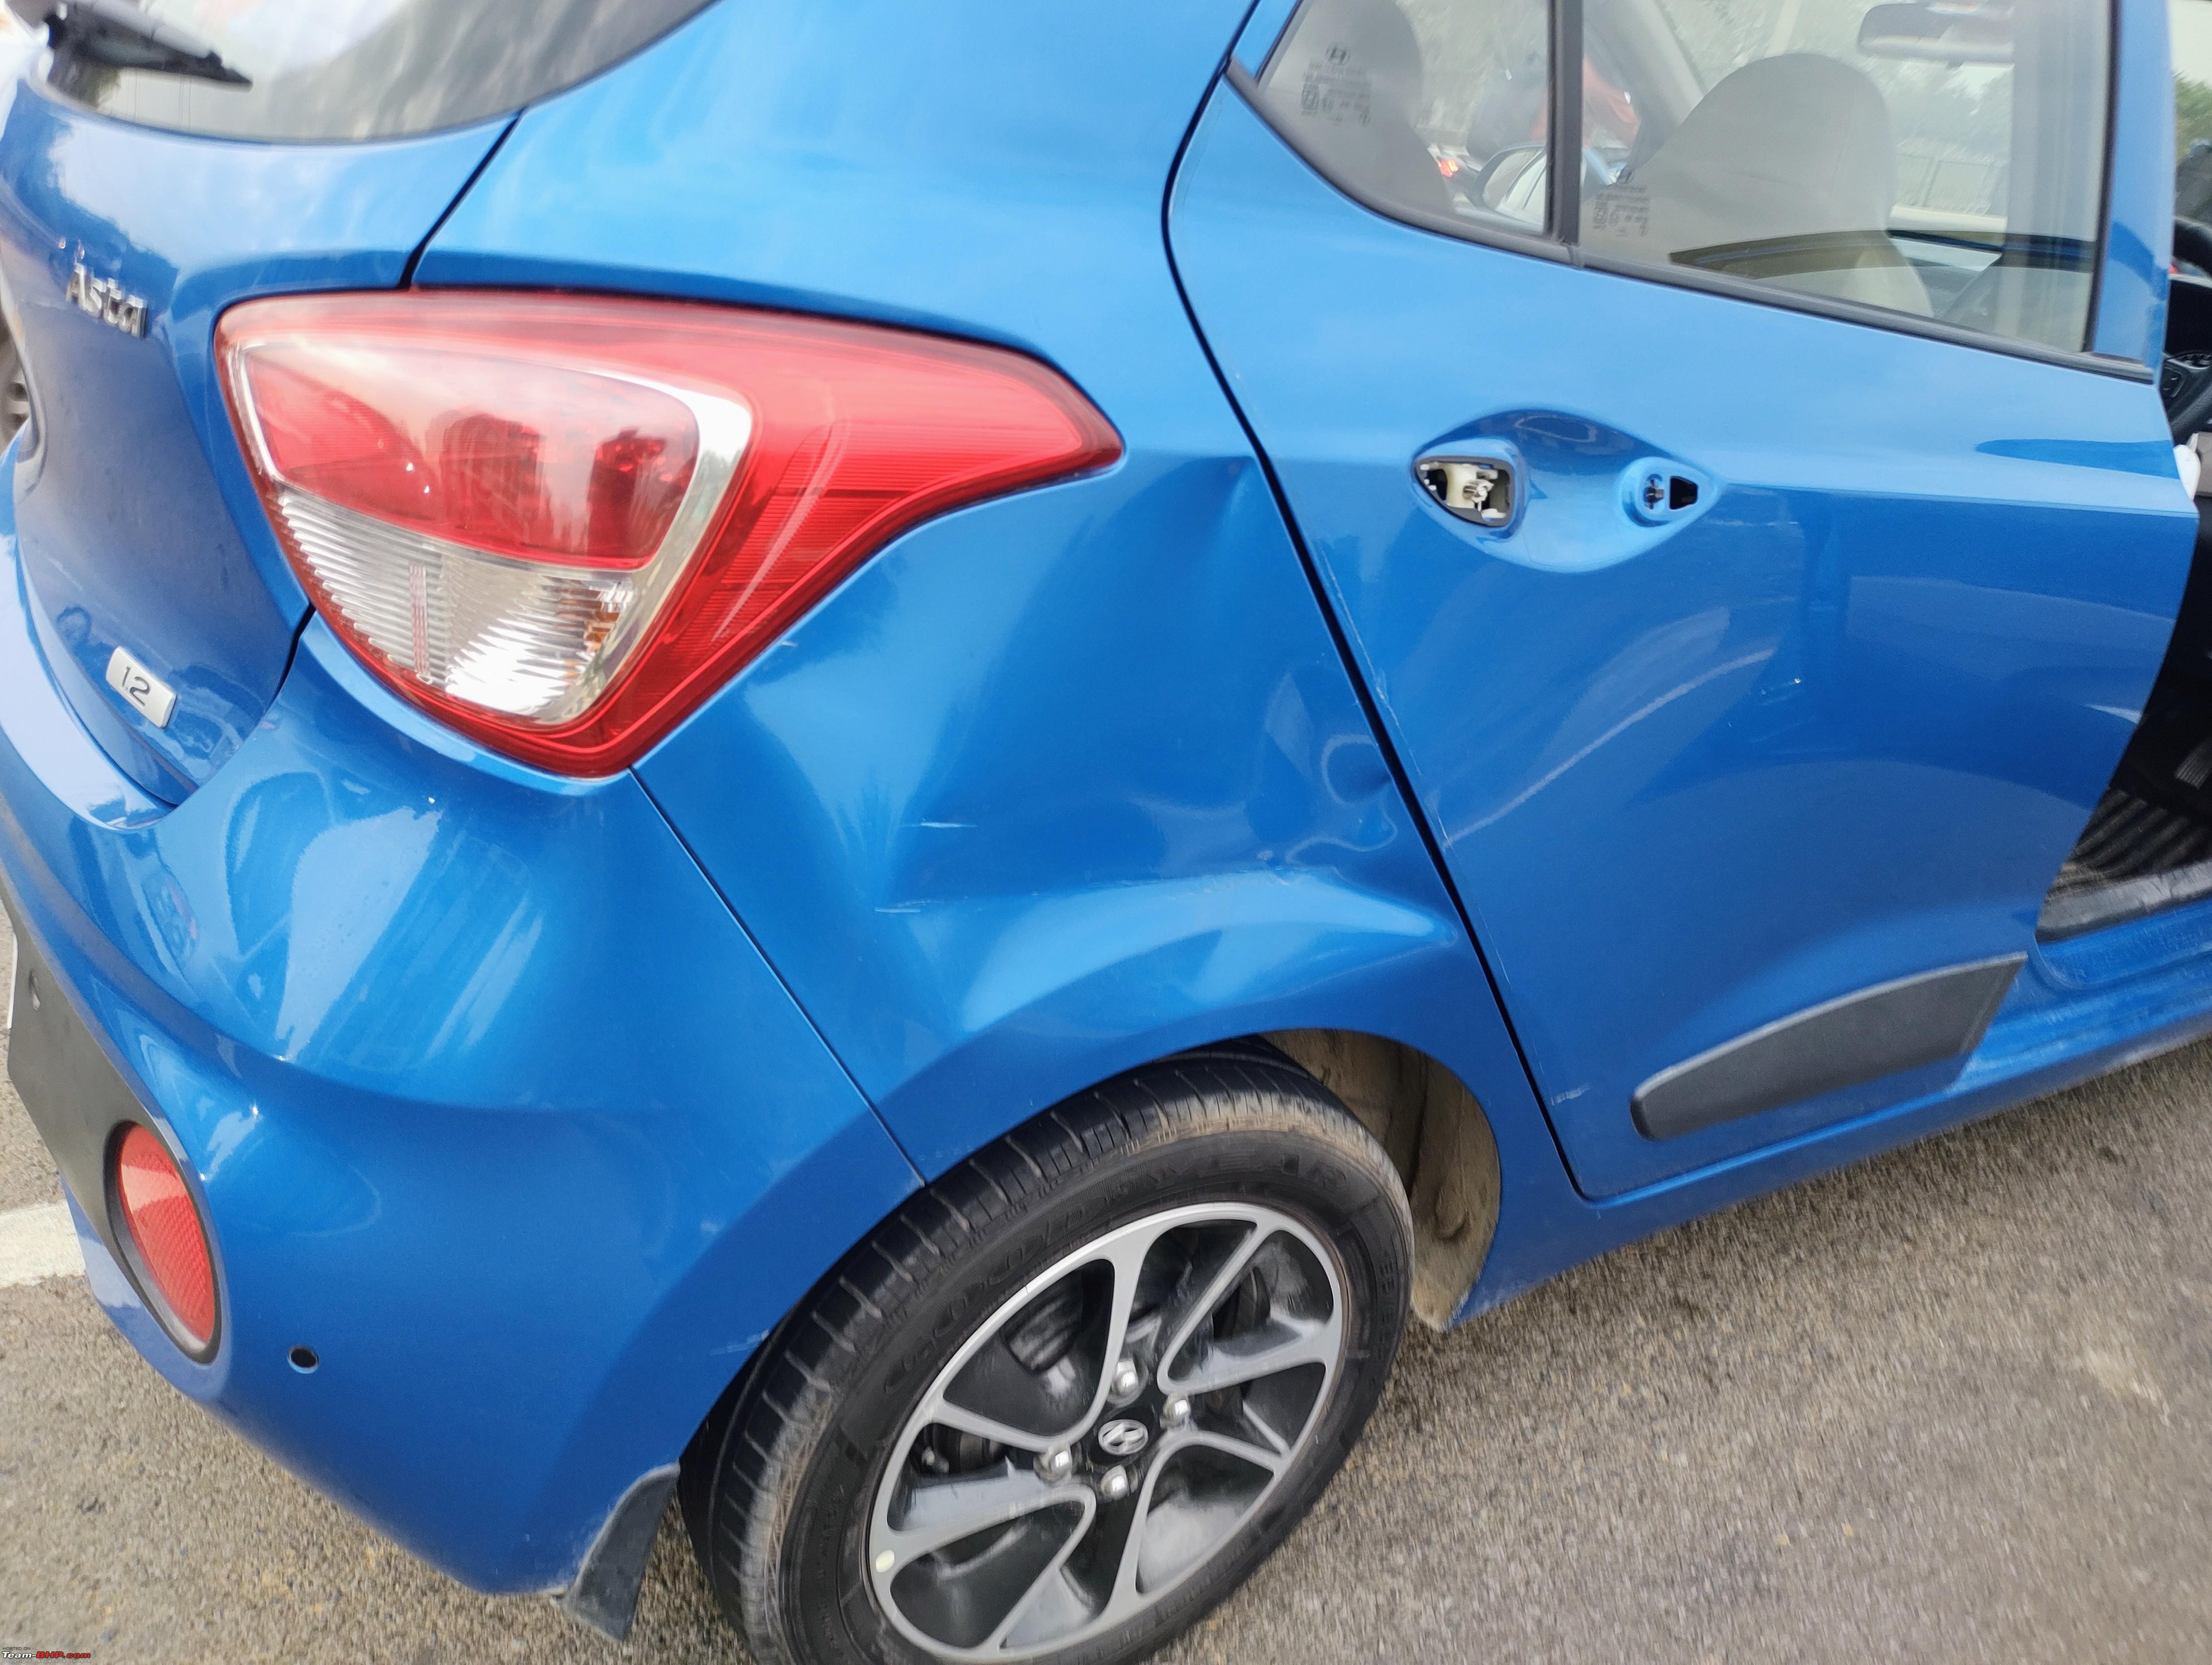 Bought a Used Hyundai Grand i10 Asta from Spinny